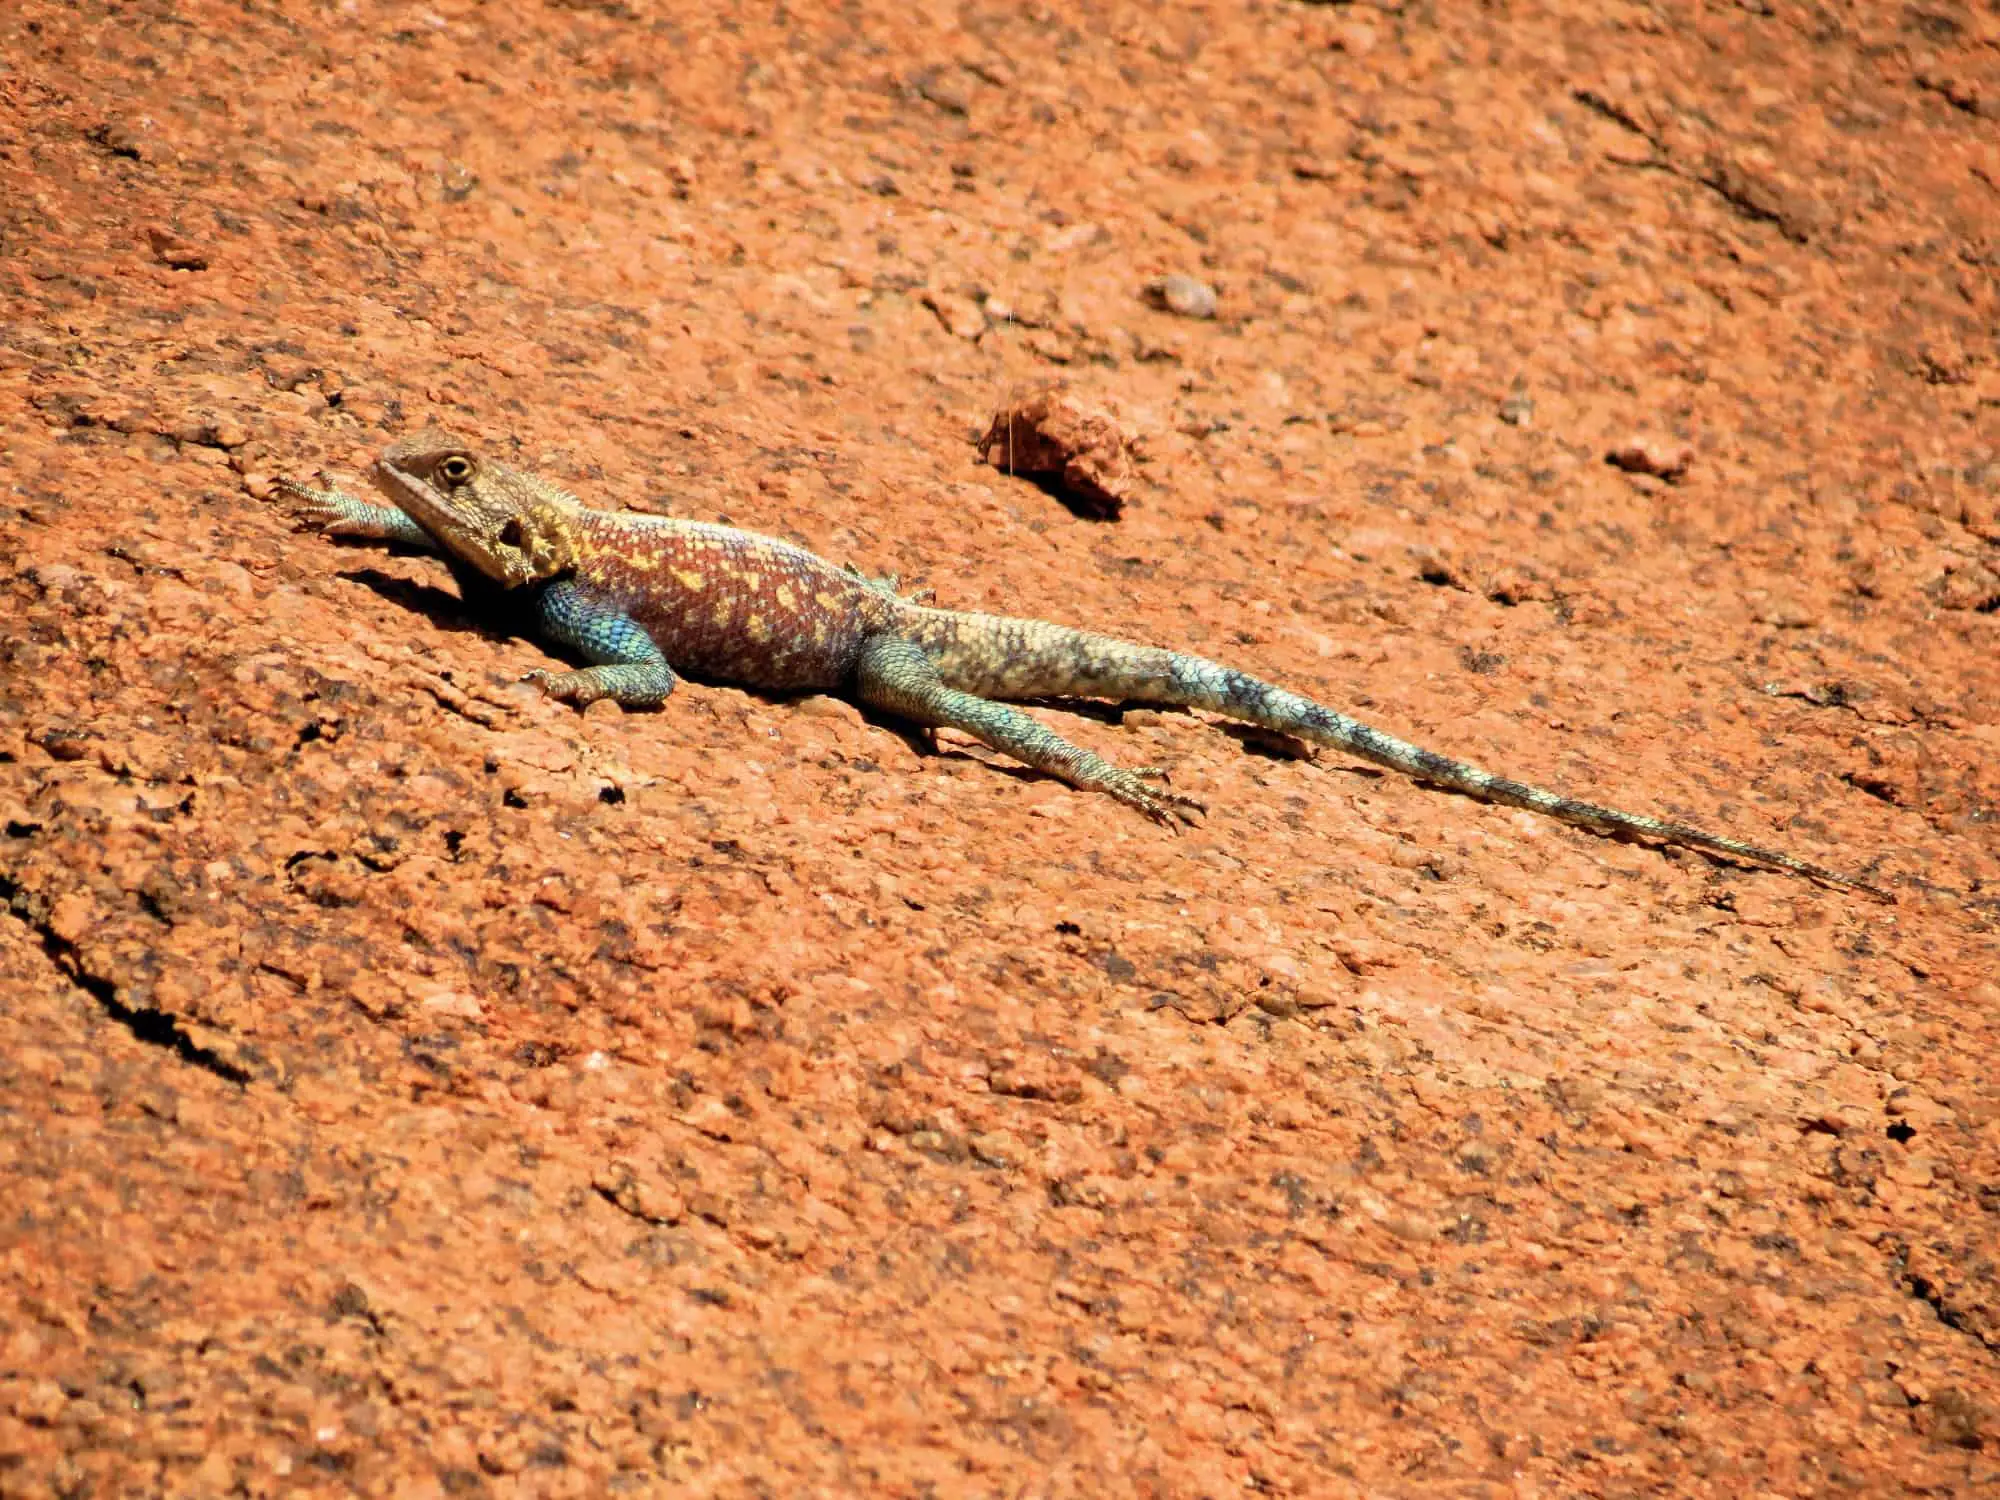 Lizard at the Blue Painted Rocks near Tafraoute, Morocco